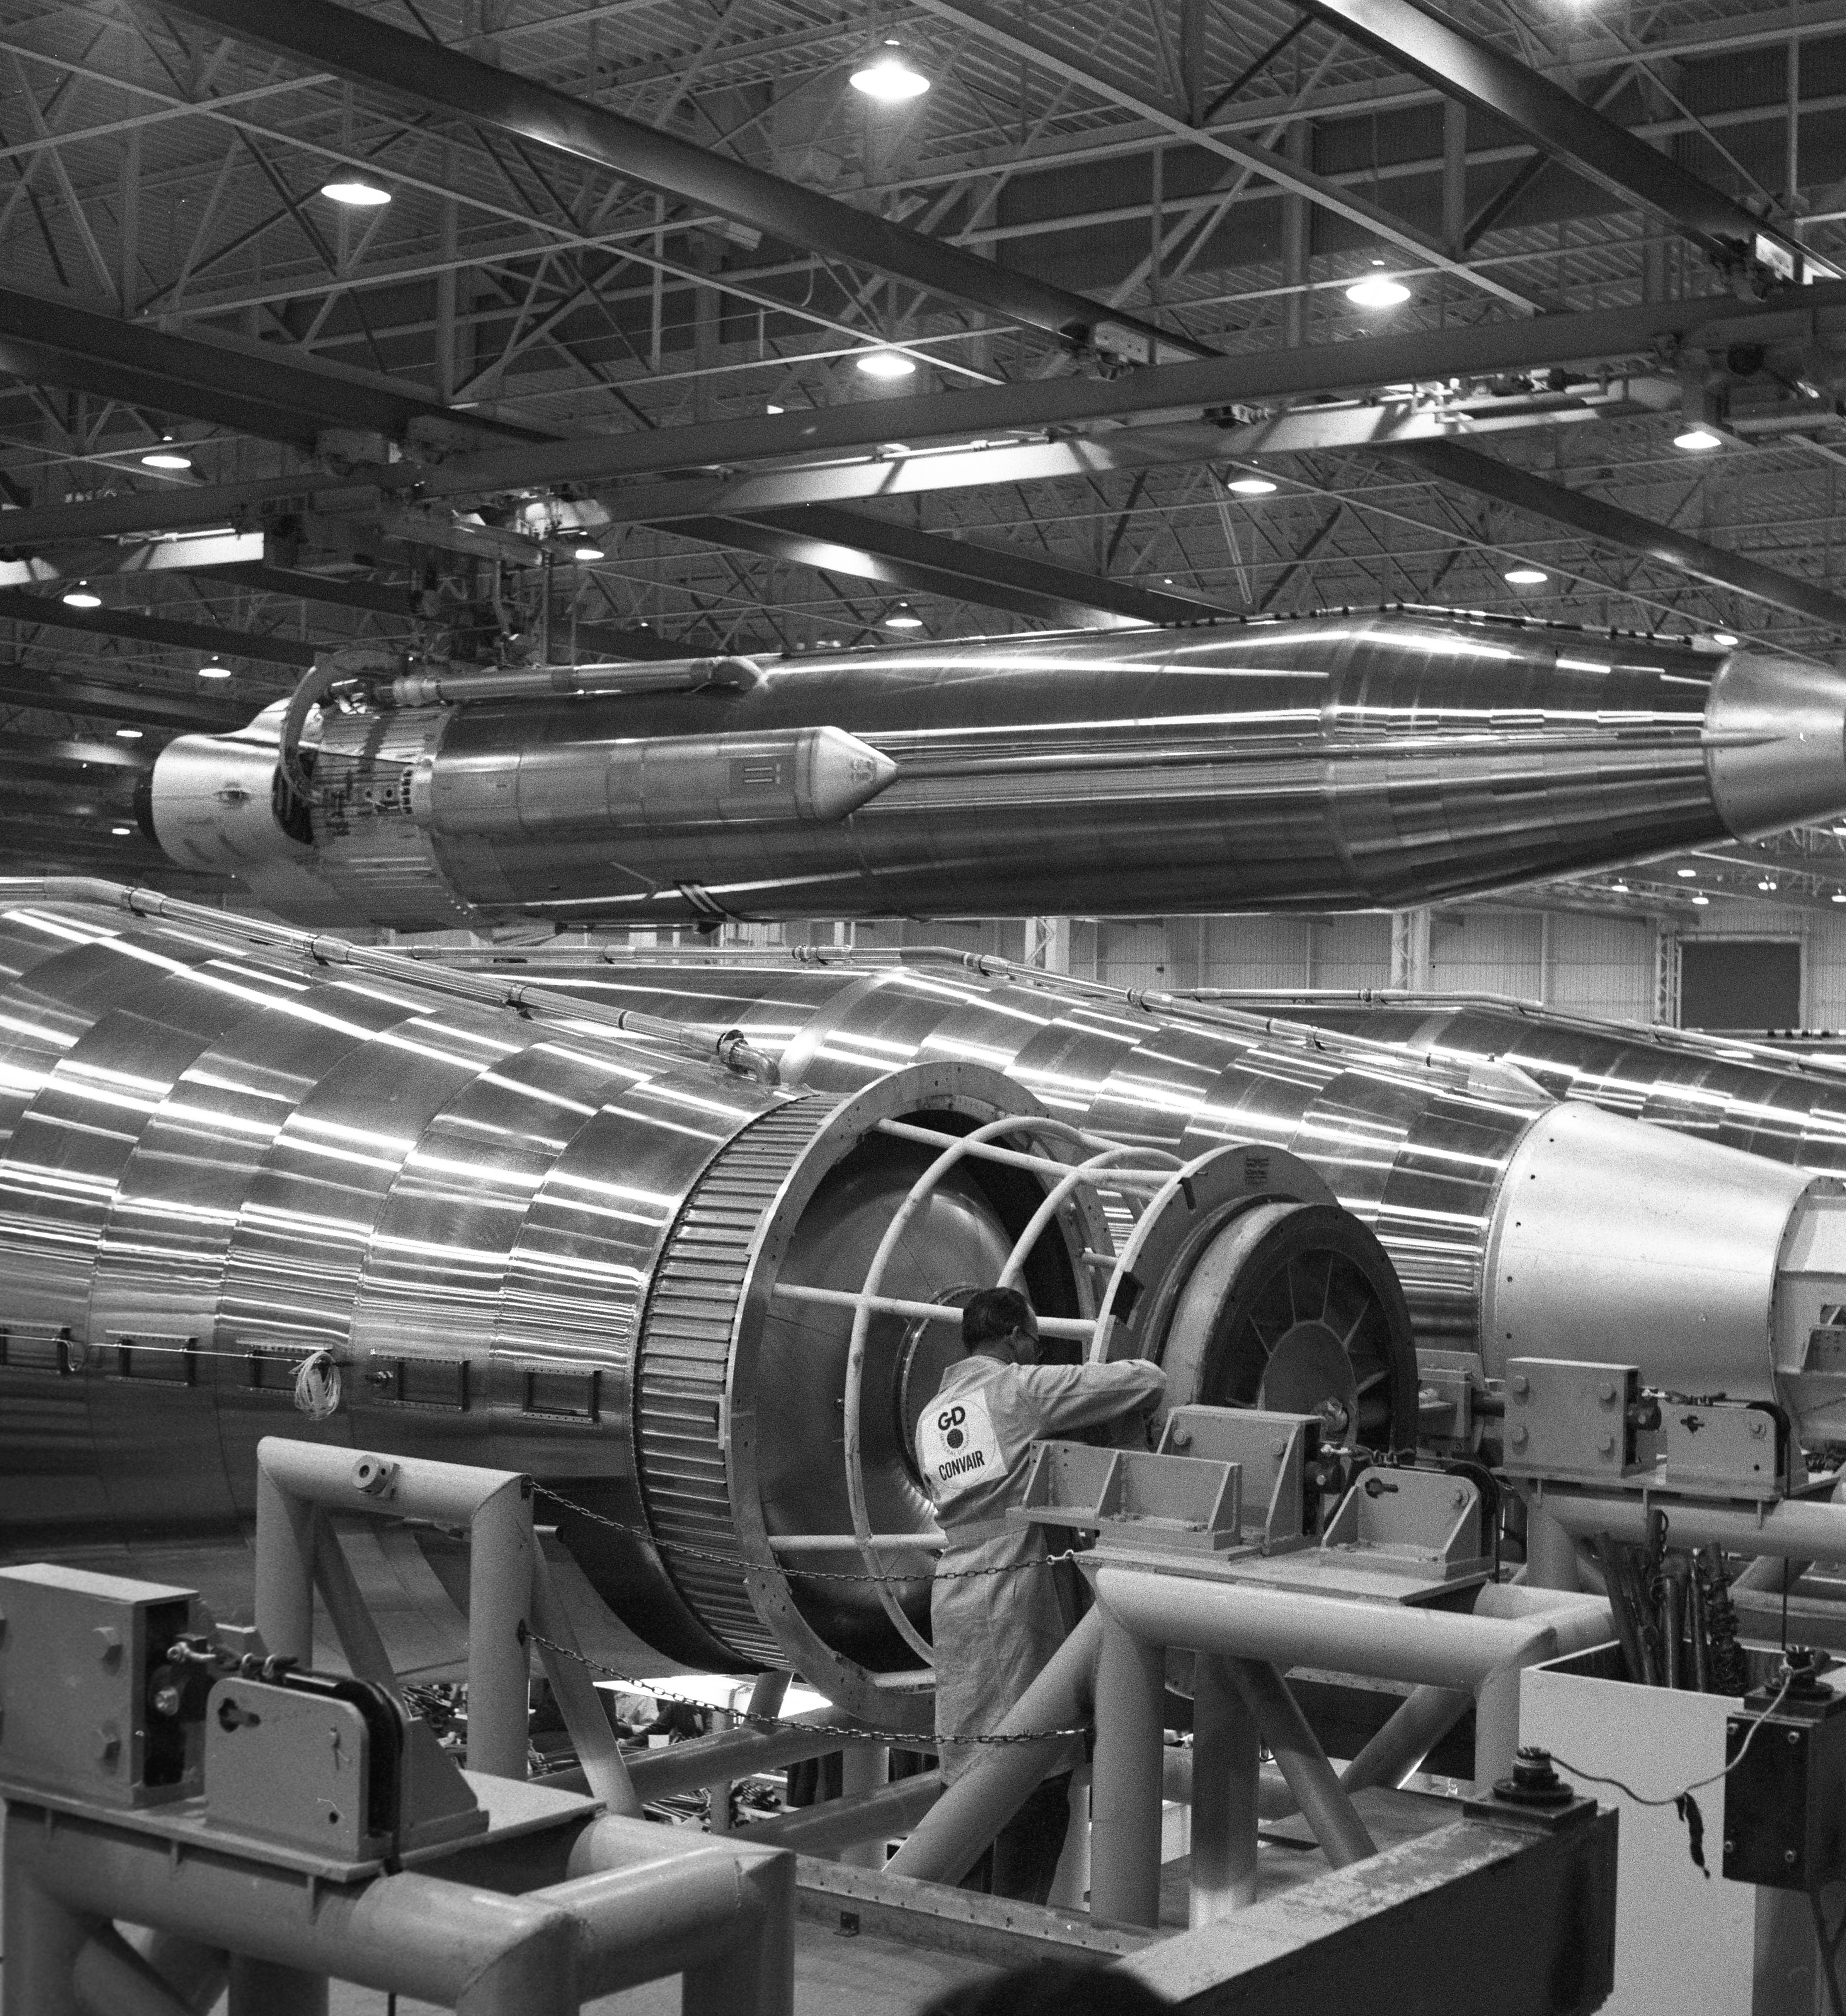 A Convair employee working on the Atlas rocket production line on February 5th, 1960. 